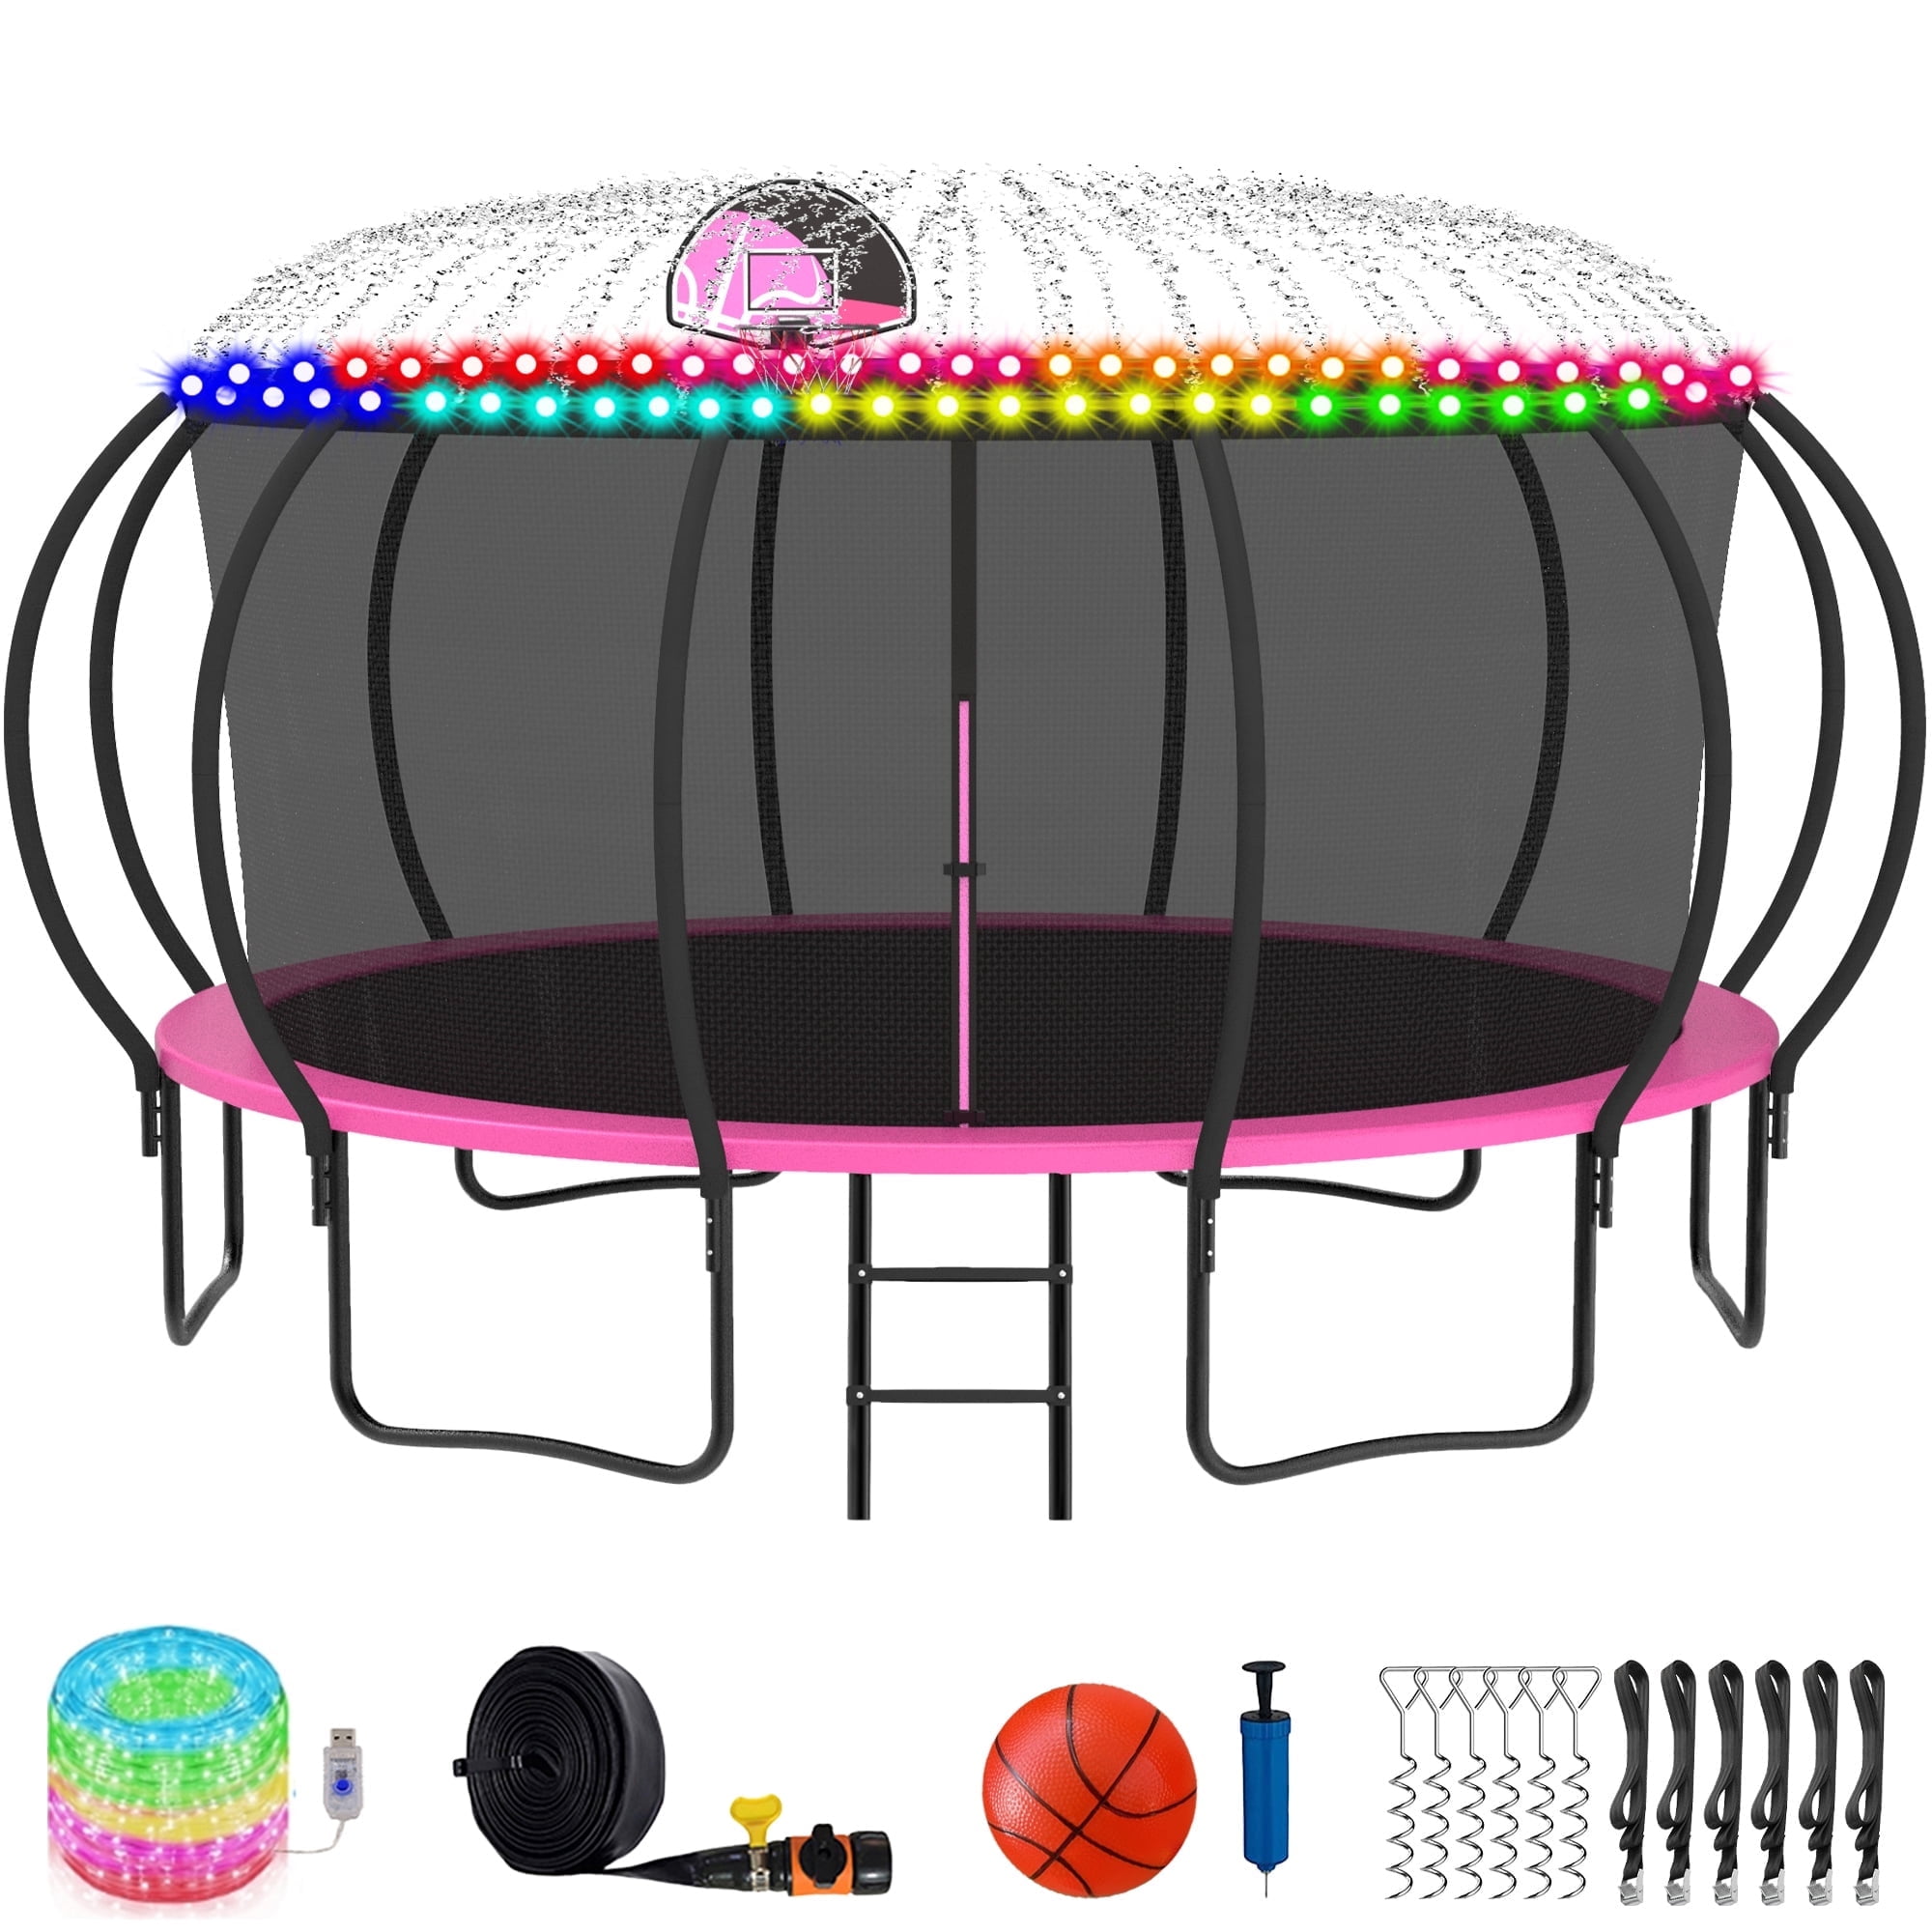 KOFUN Trampoline with Basketball Hoop, 8FT 10FT 12FT 14FT 15FT 16FT  Trampoline with Enclosure, Light, Sprinkler, Anchors Kit, Ladder, Heavy Duty  Backyard Trampoline for Kids and Adults, Pink 